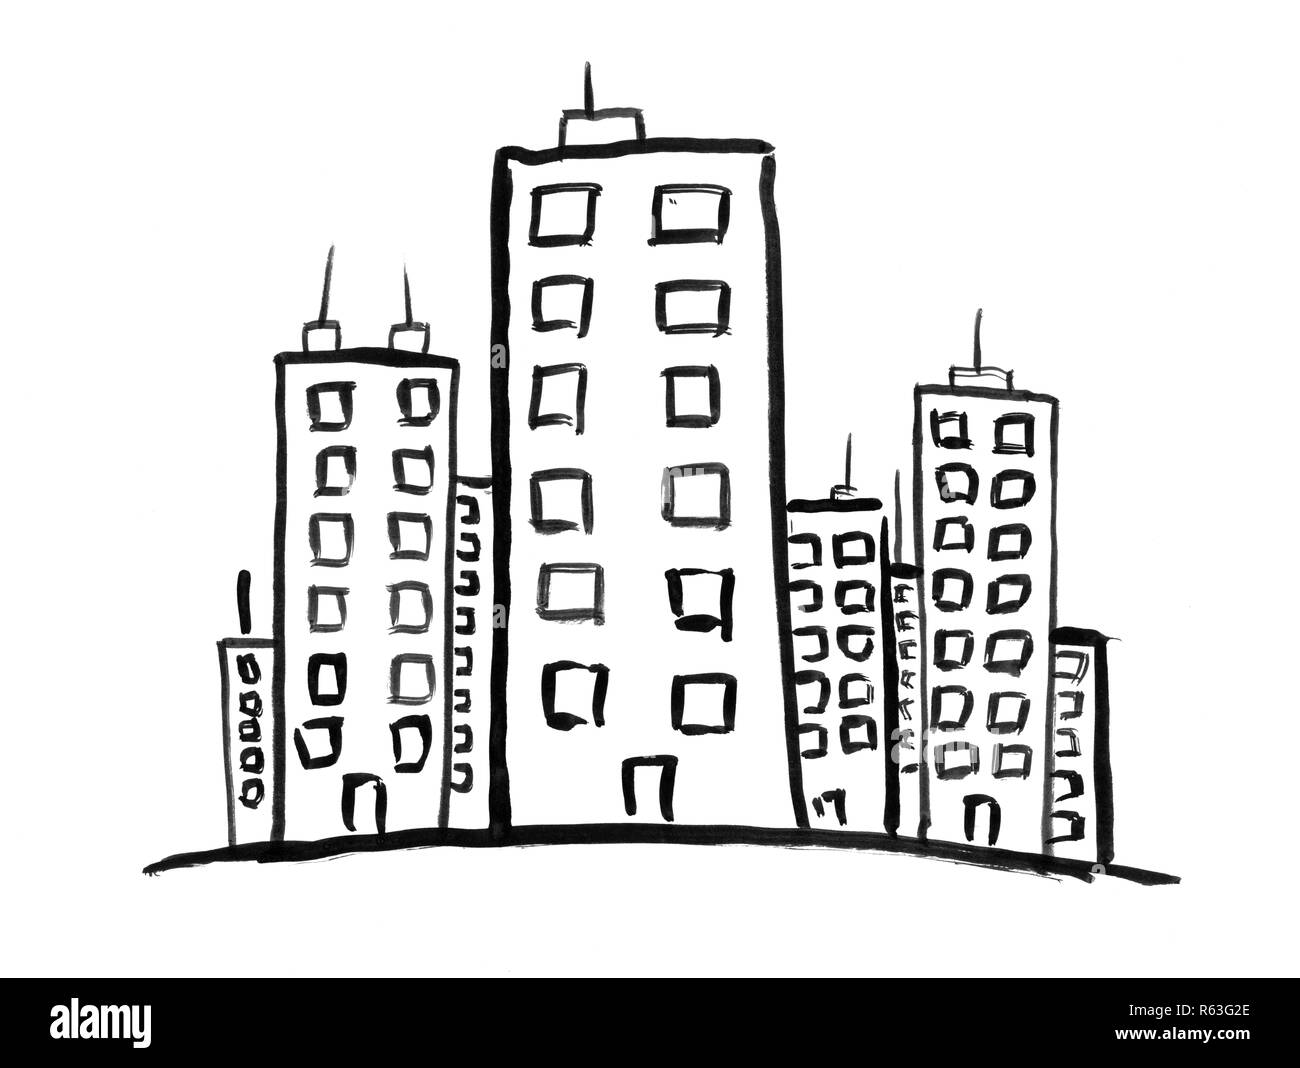 Black Ink Grunge Hand Drawing of High Apartment Flats Blocks or Houses Stock Photo